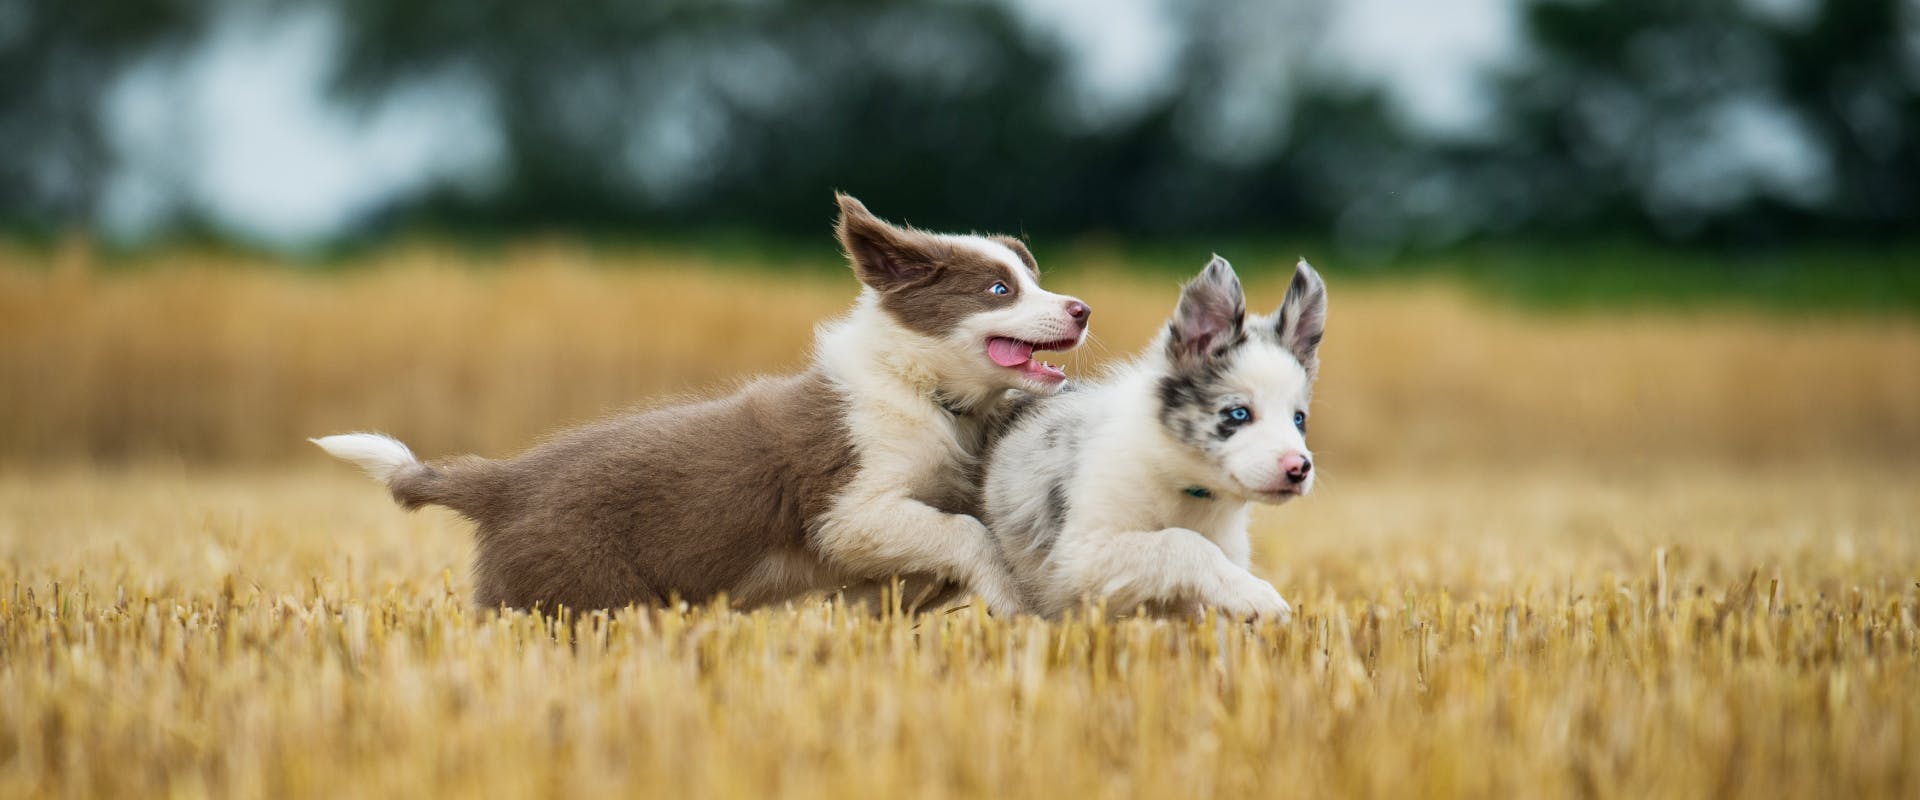 two Australian shepherd puppies running and playing in a field of wheat